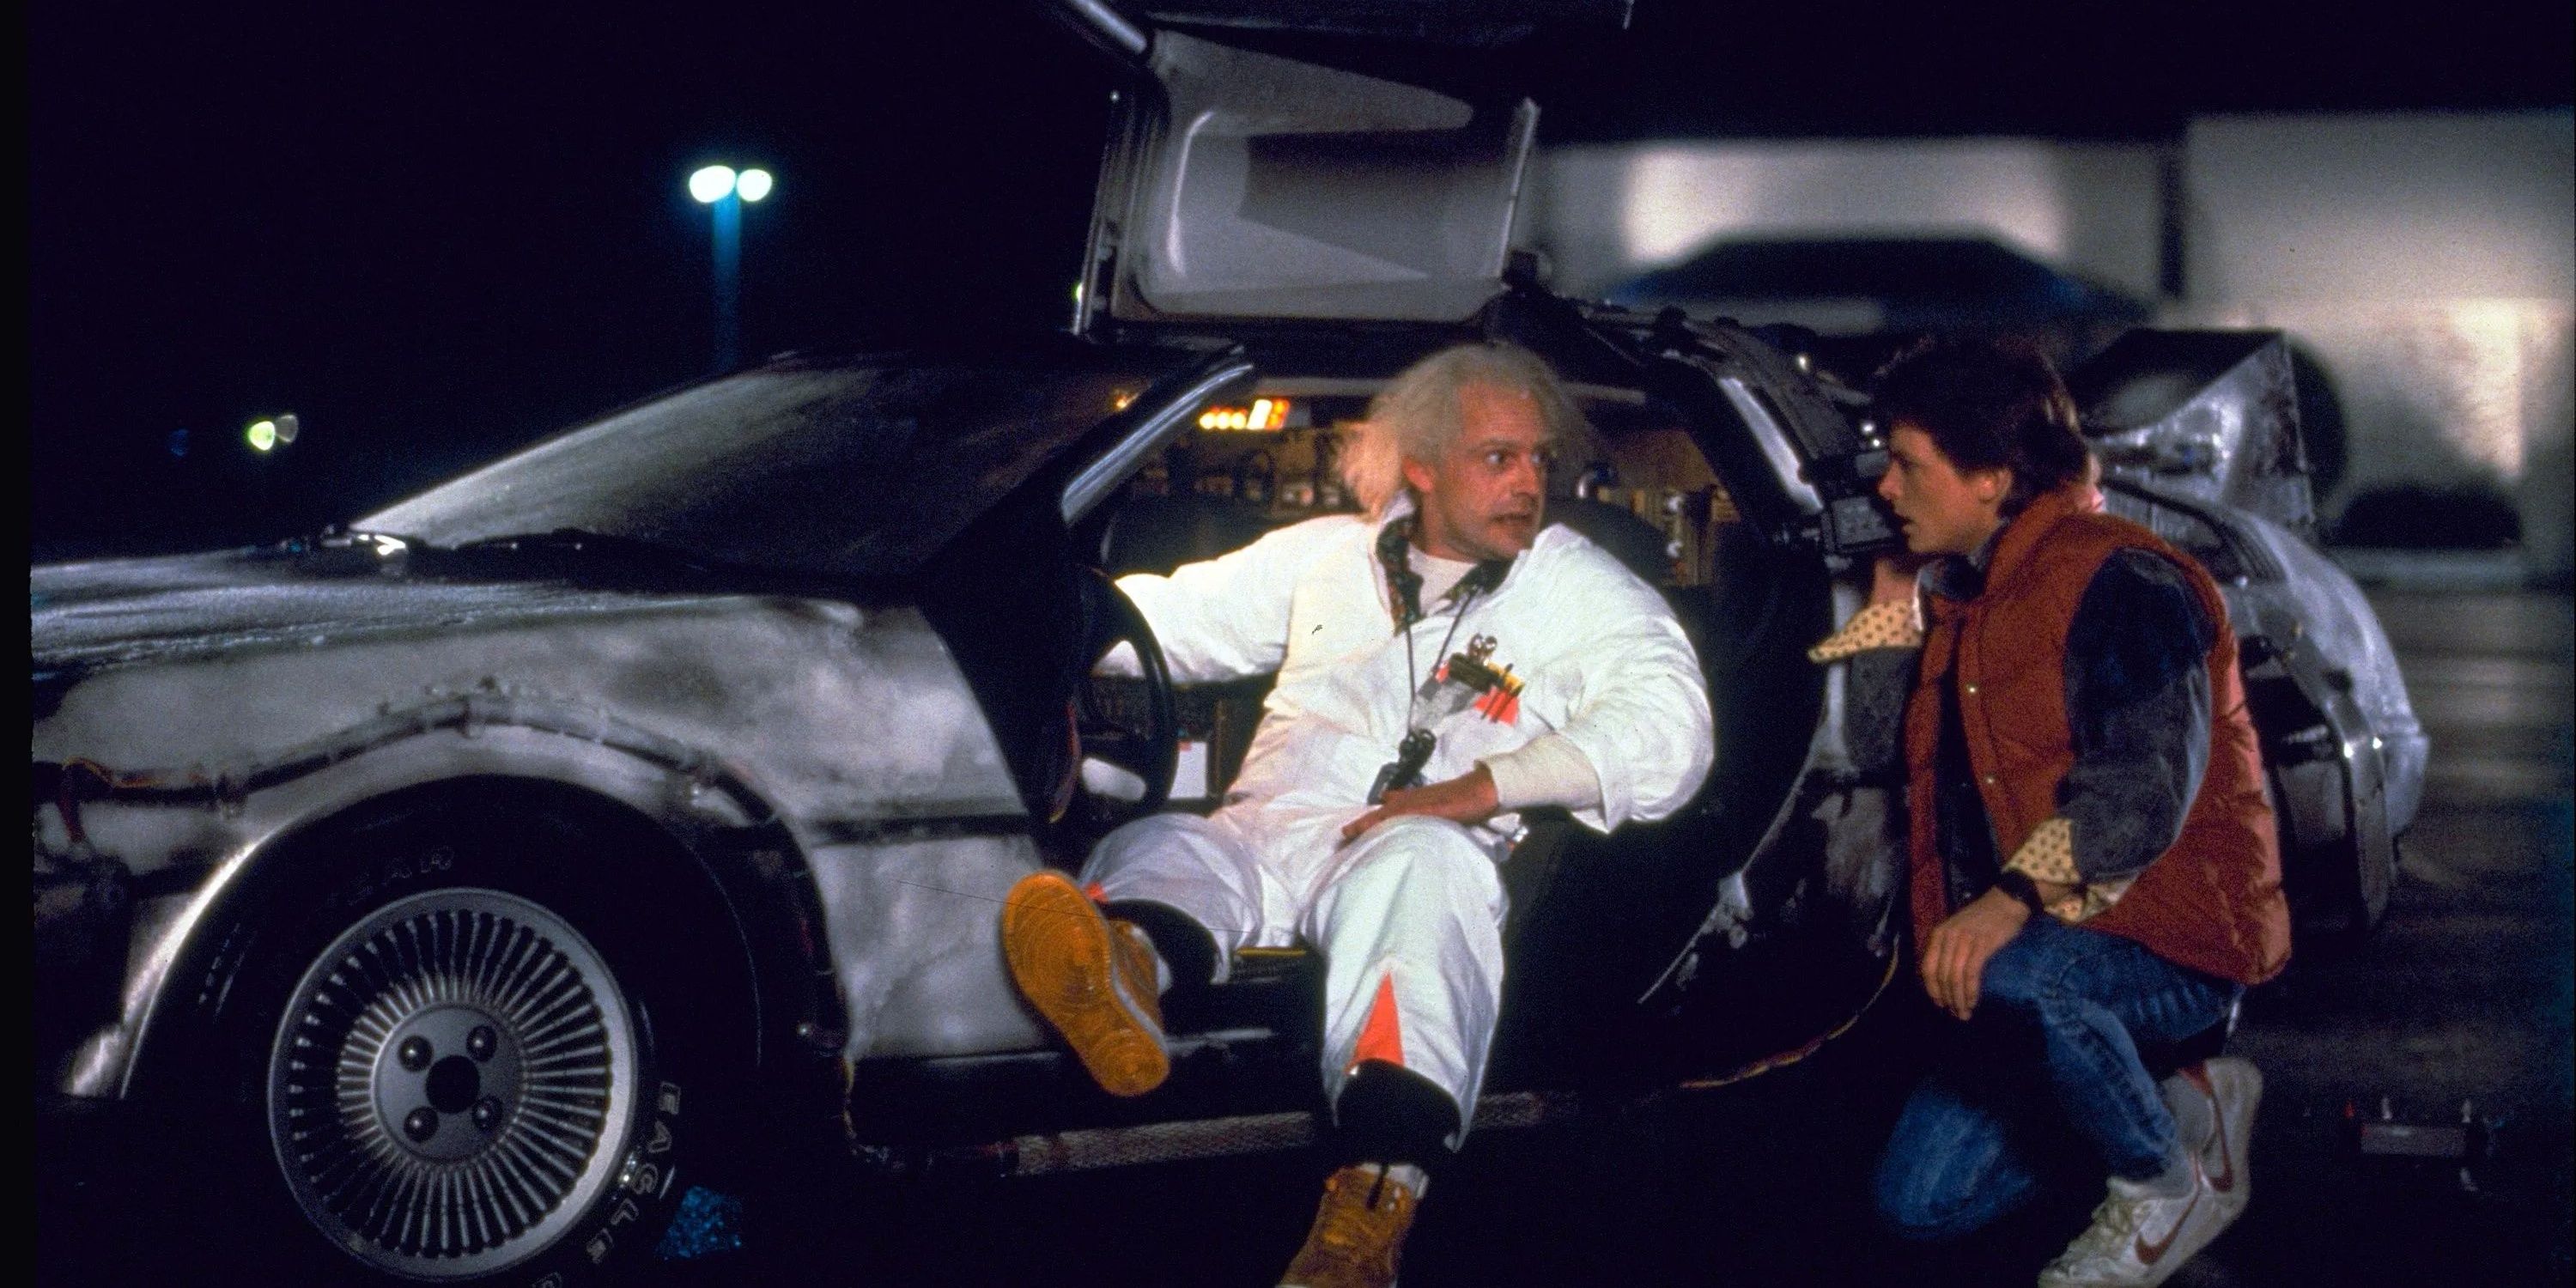 Christopher Lloyd and Michael J. Fox by the DeLorean in Back to the Future